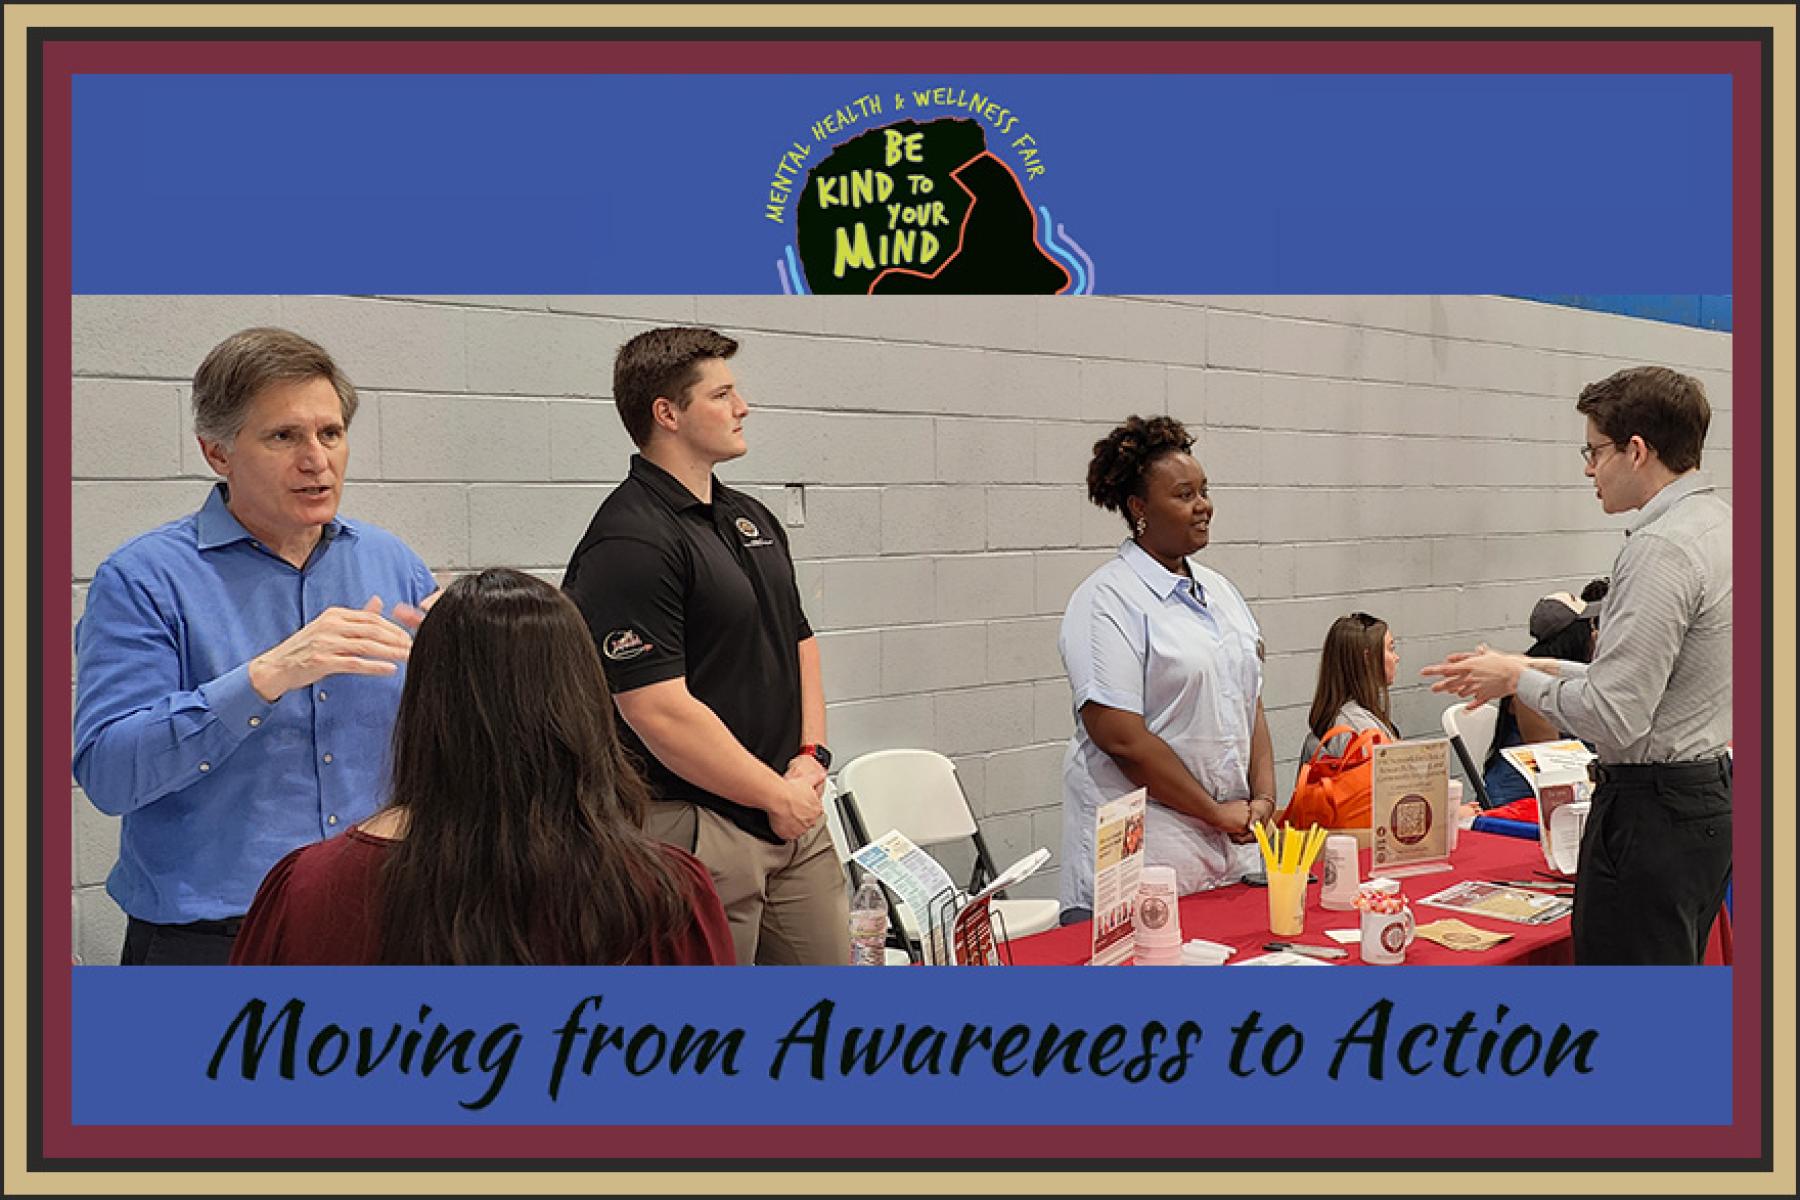 5th annual “Be Kind to Your Mind” Mental Health & Wellness Fair